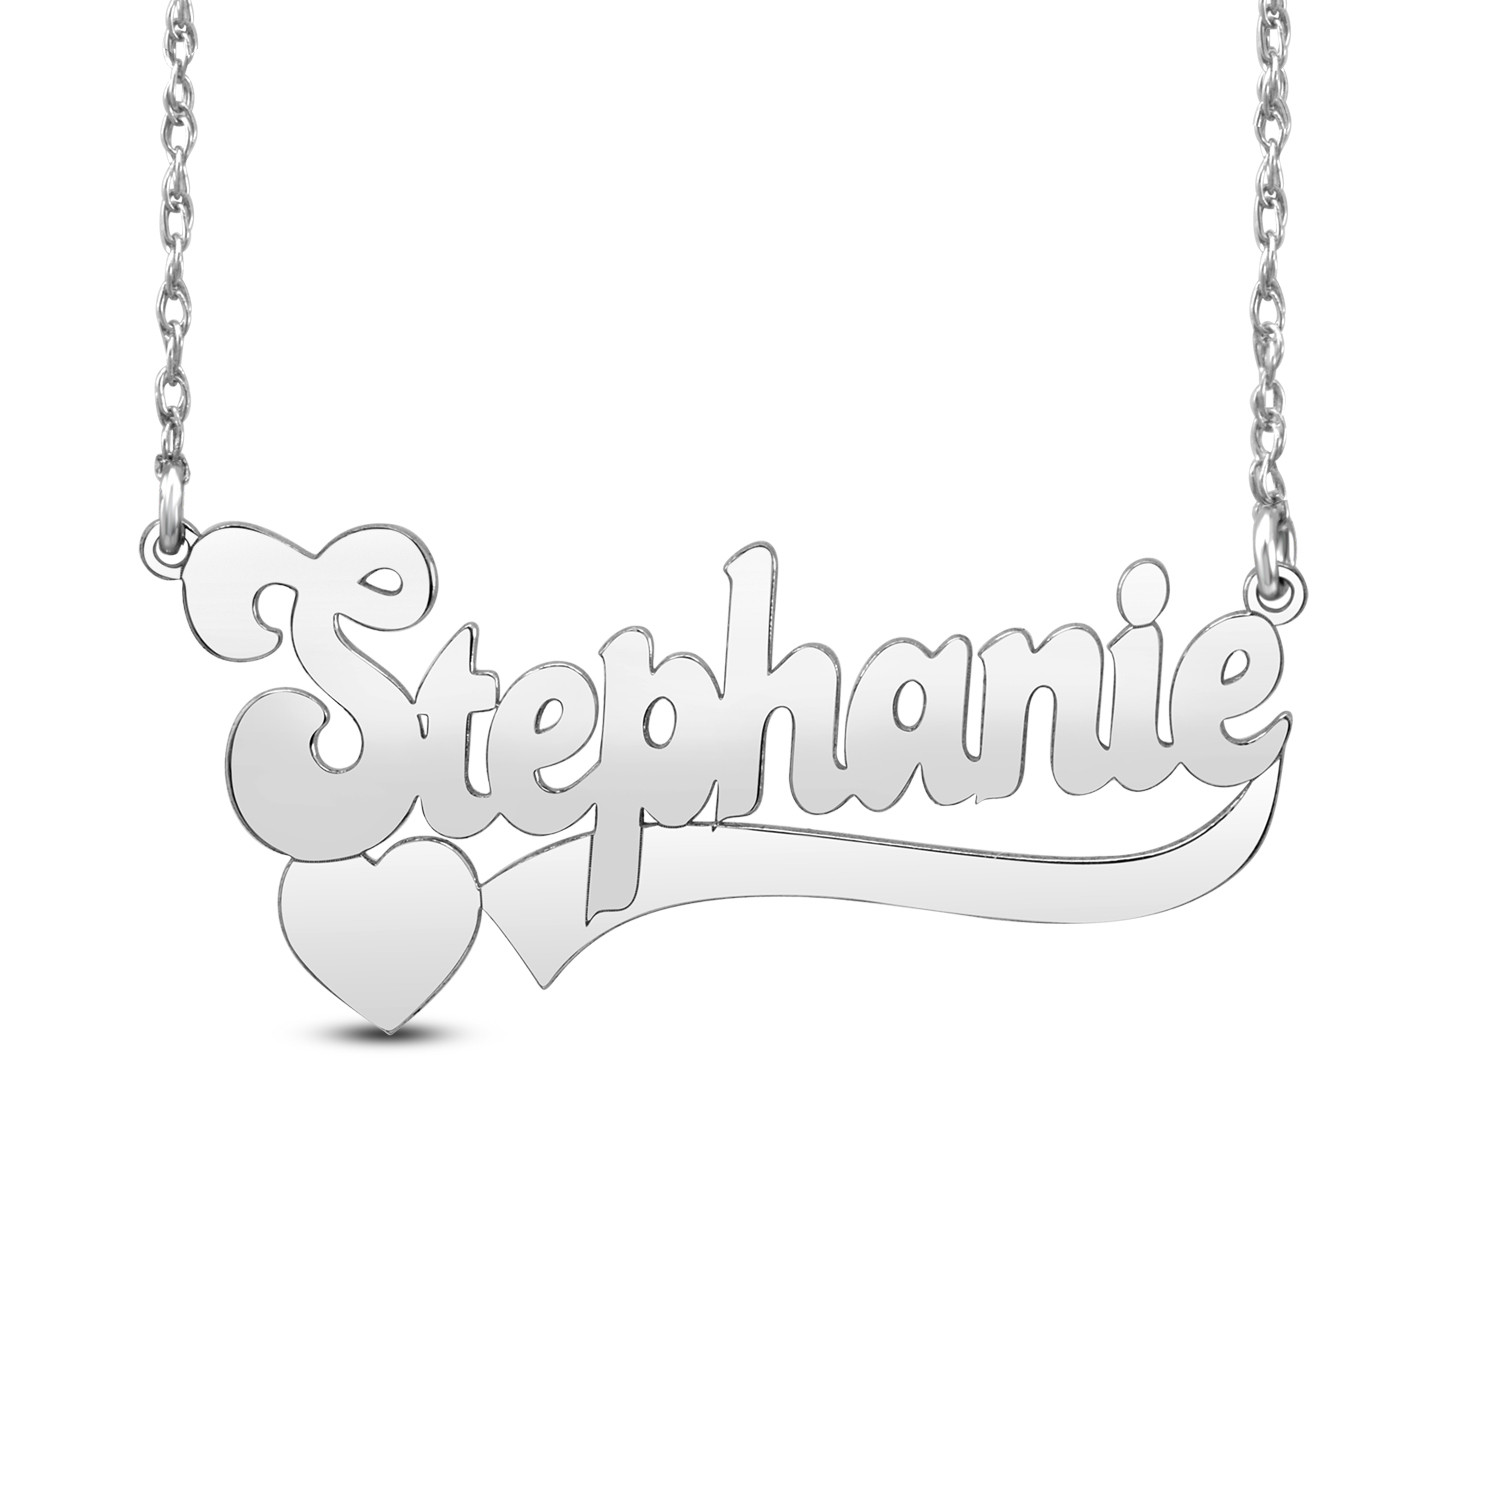 Large Script Name With Heart And Ribbon Necklace In Sterling Silver 1 Line Piercing Pagoda